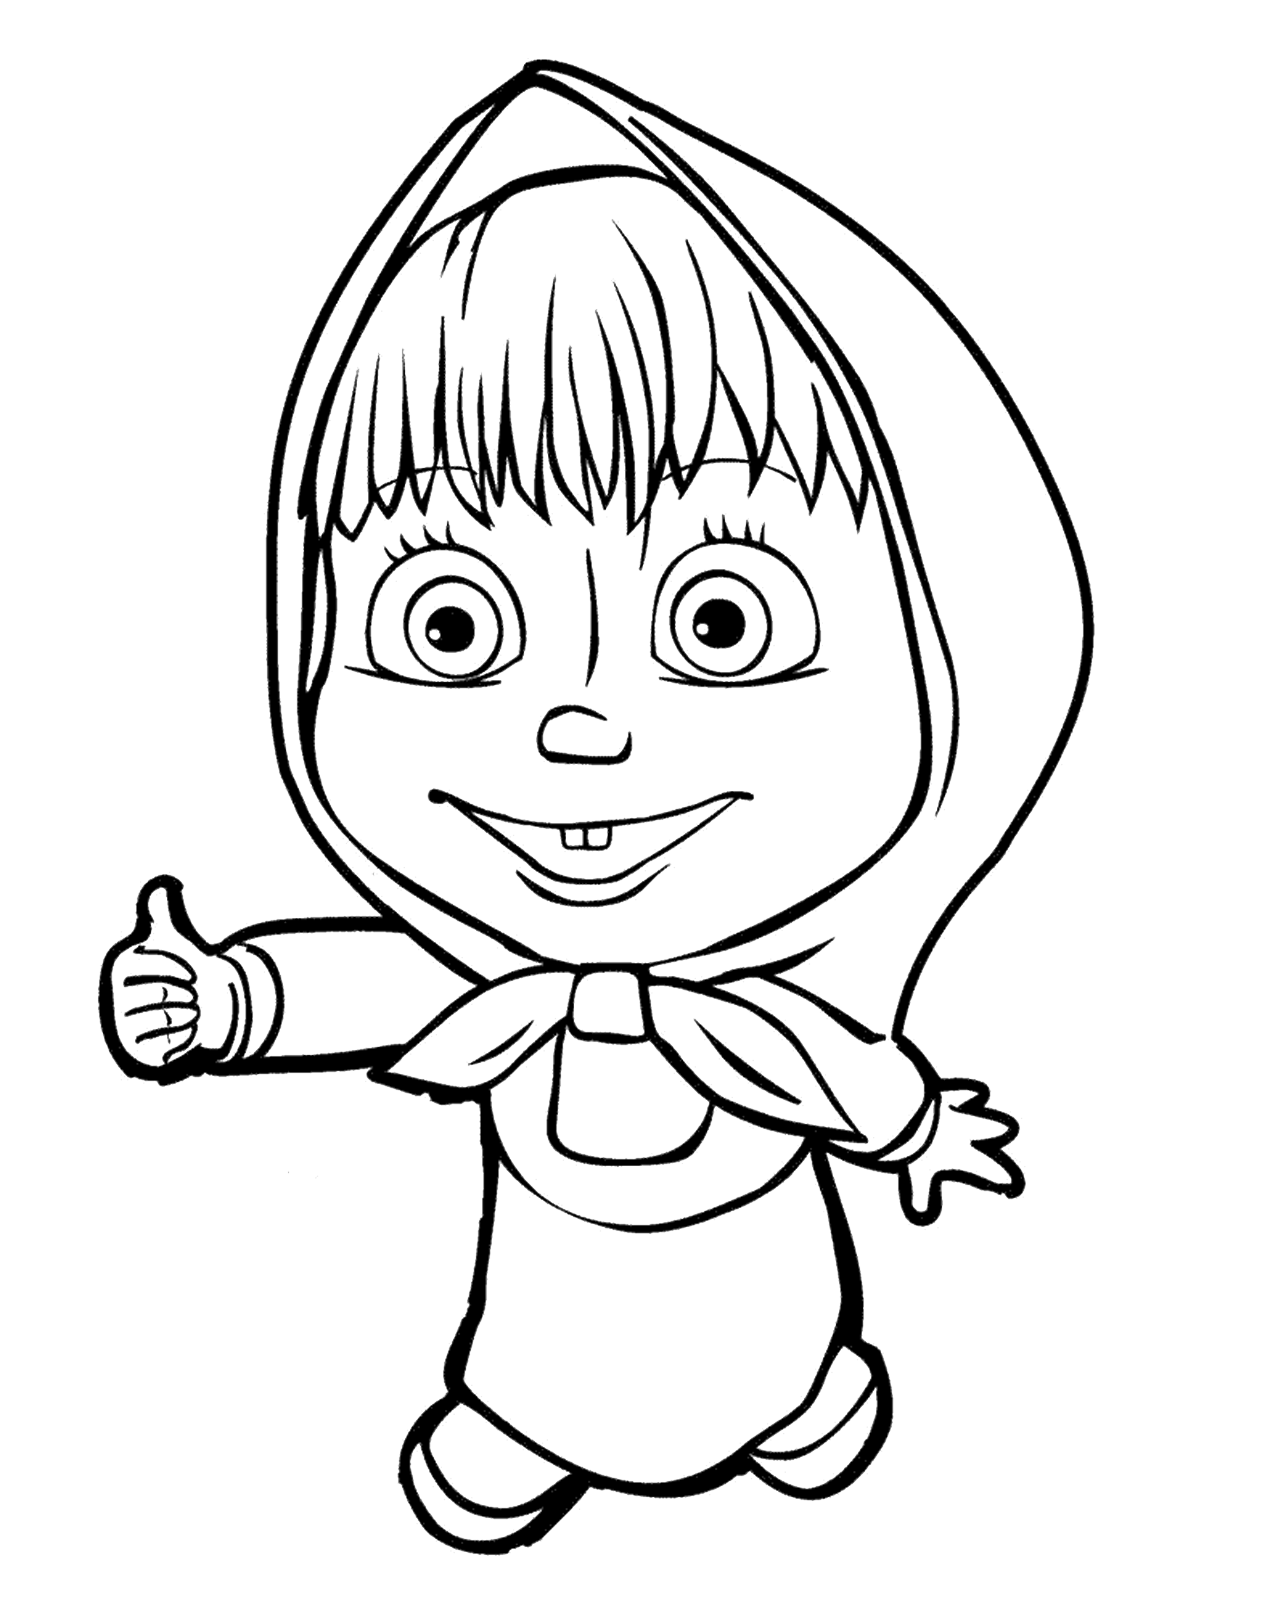 Coloring Book : Coloring Pages Masha And The Bear ...